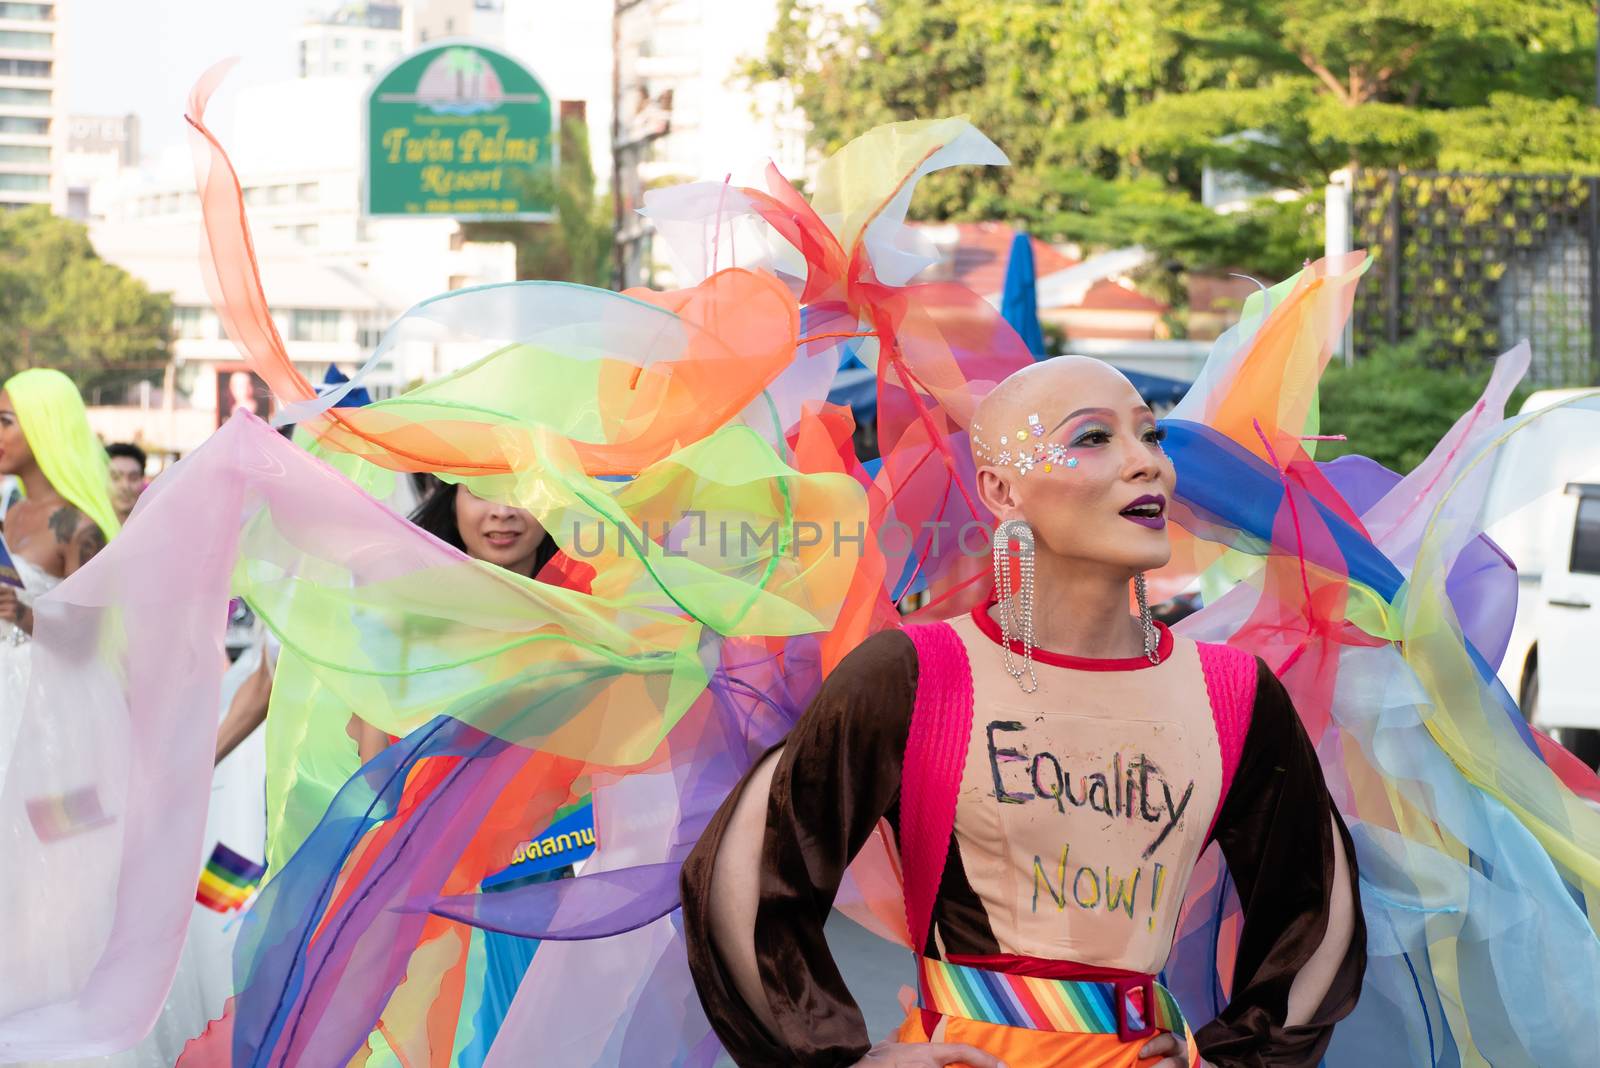 PATTAYA, THAILAND - FEBRUARY 9, 2019: LGBT oriented people wear cloth write equality now take part in Pattaya Pride Rainbow Festival Parade, in Pattaya, Thailand on February 9, 2019